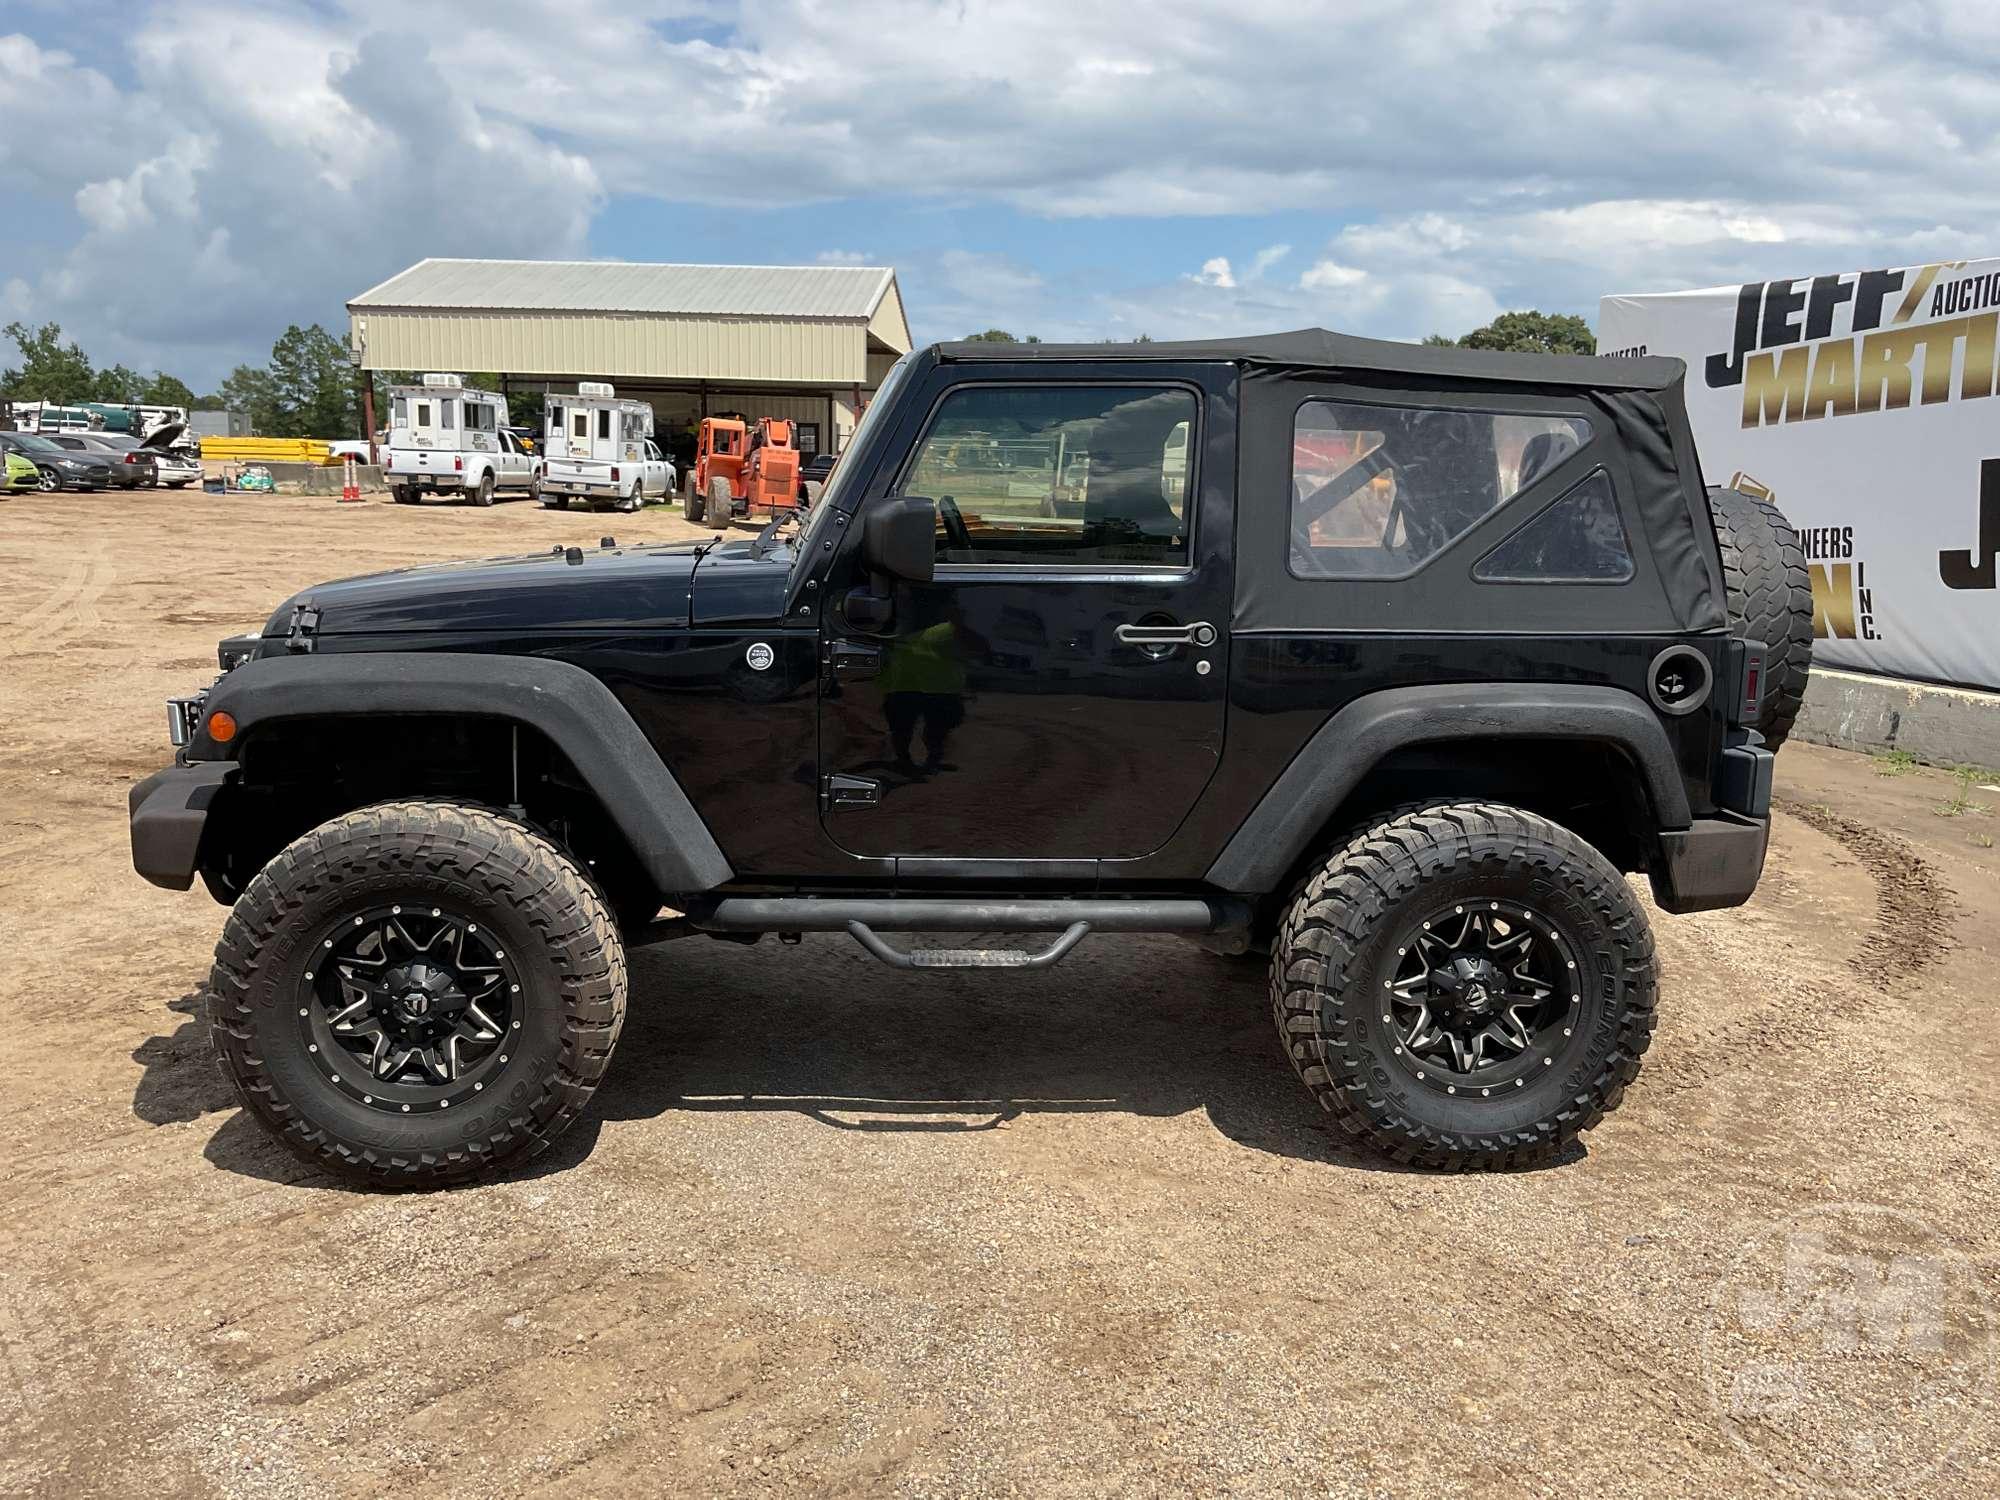 2015 JEEP WRANGLER TRAIL RATED VIN: 1C4AJWAGXFL541354 4WD SUV